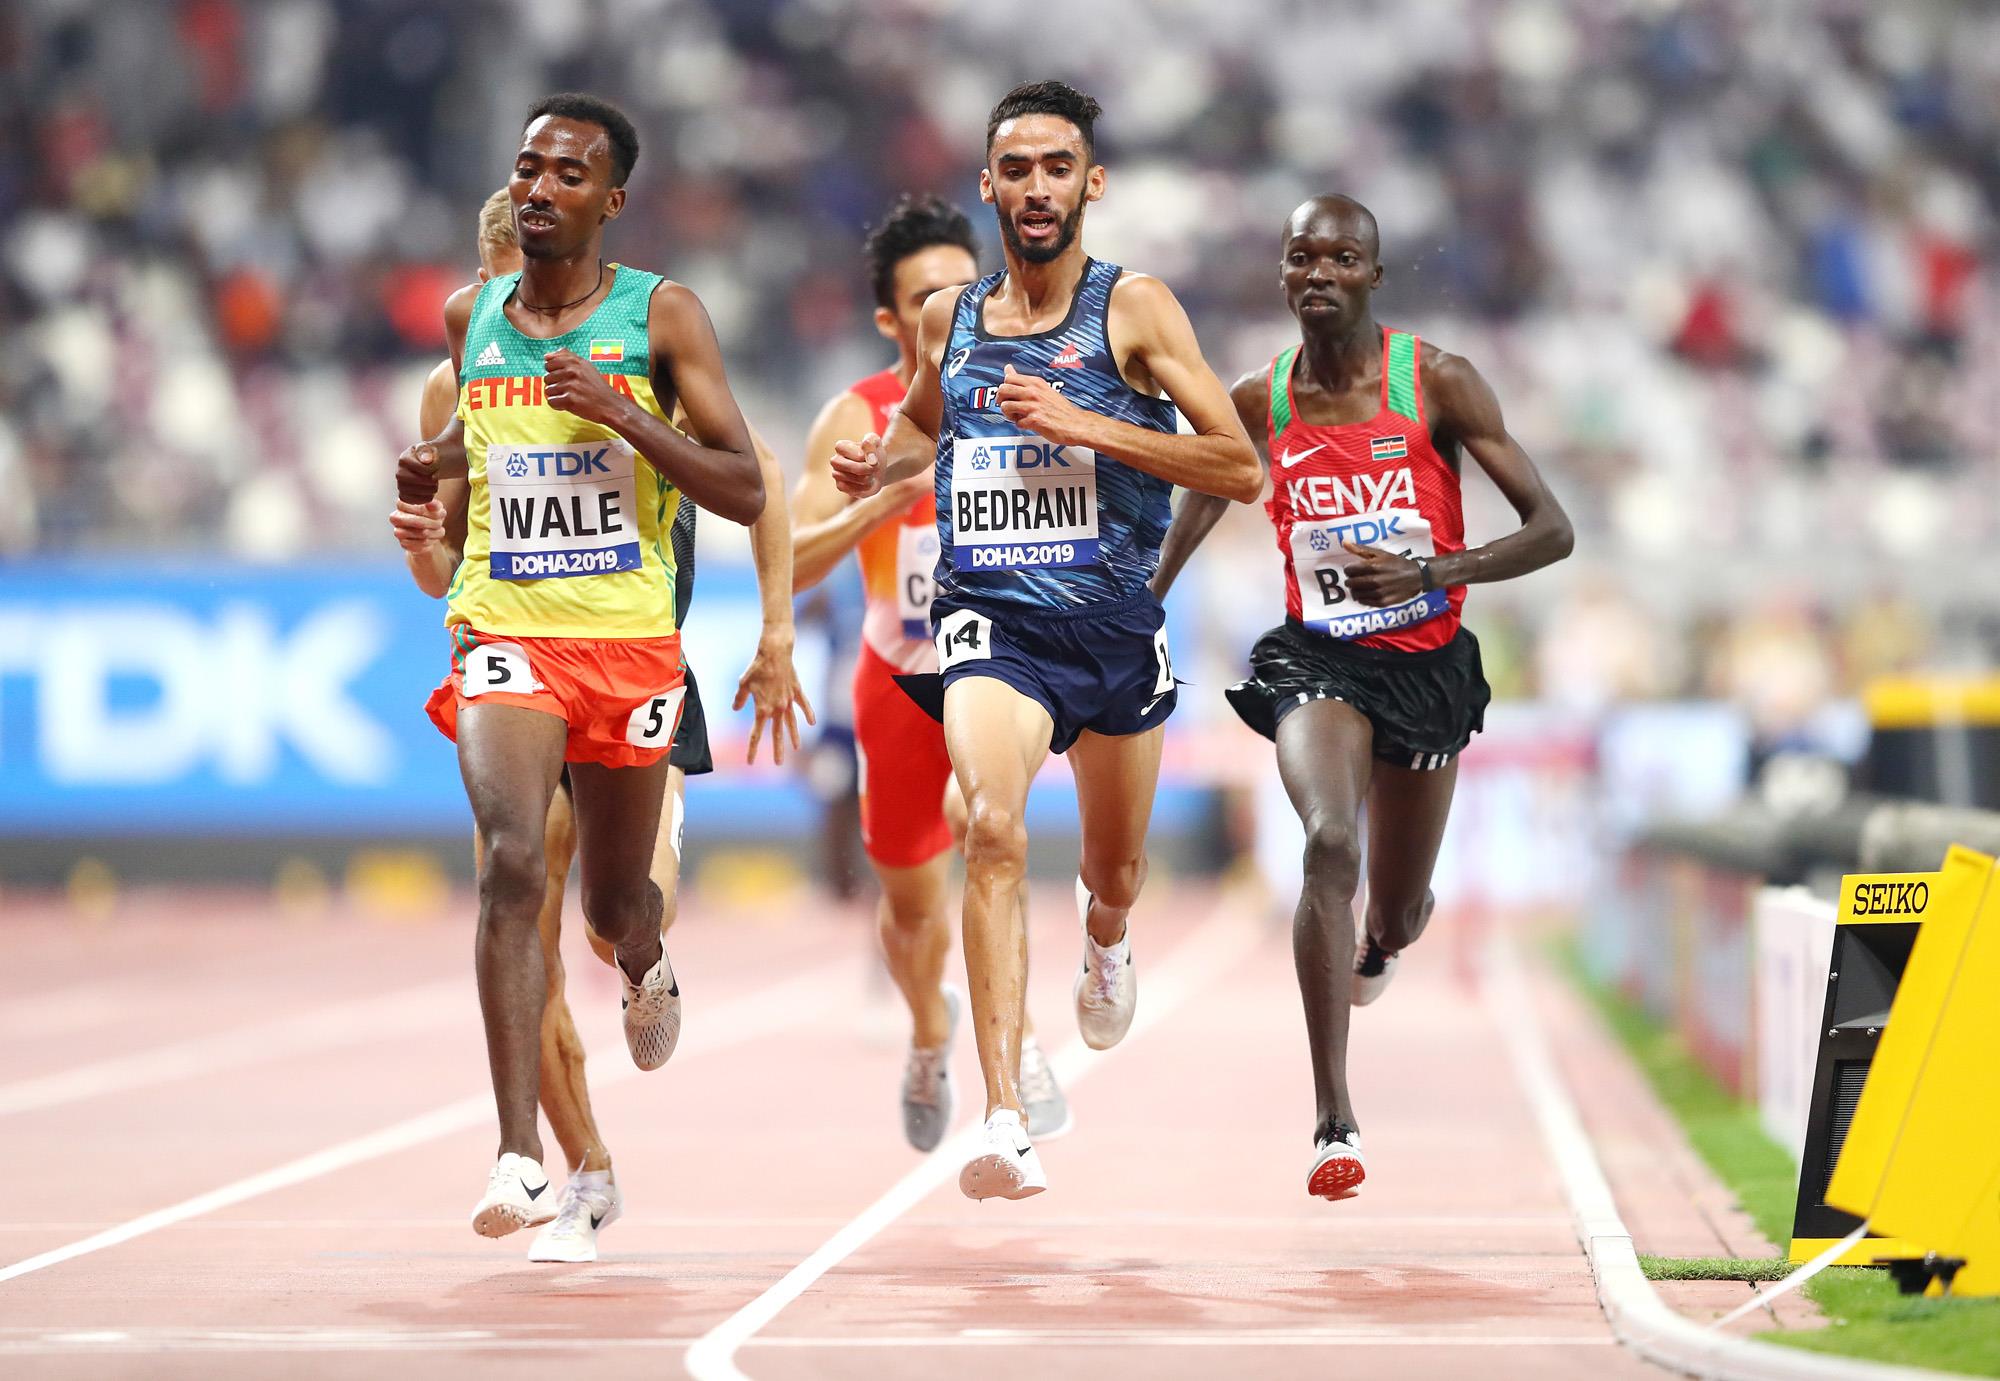 Action from the men's steeplechase at the World Championships (Getty Images)